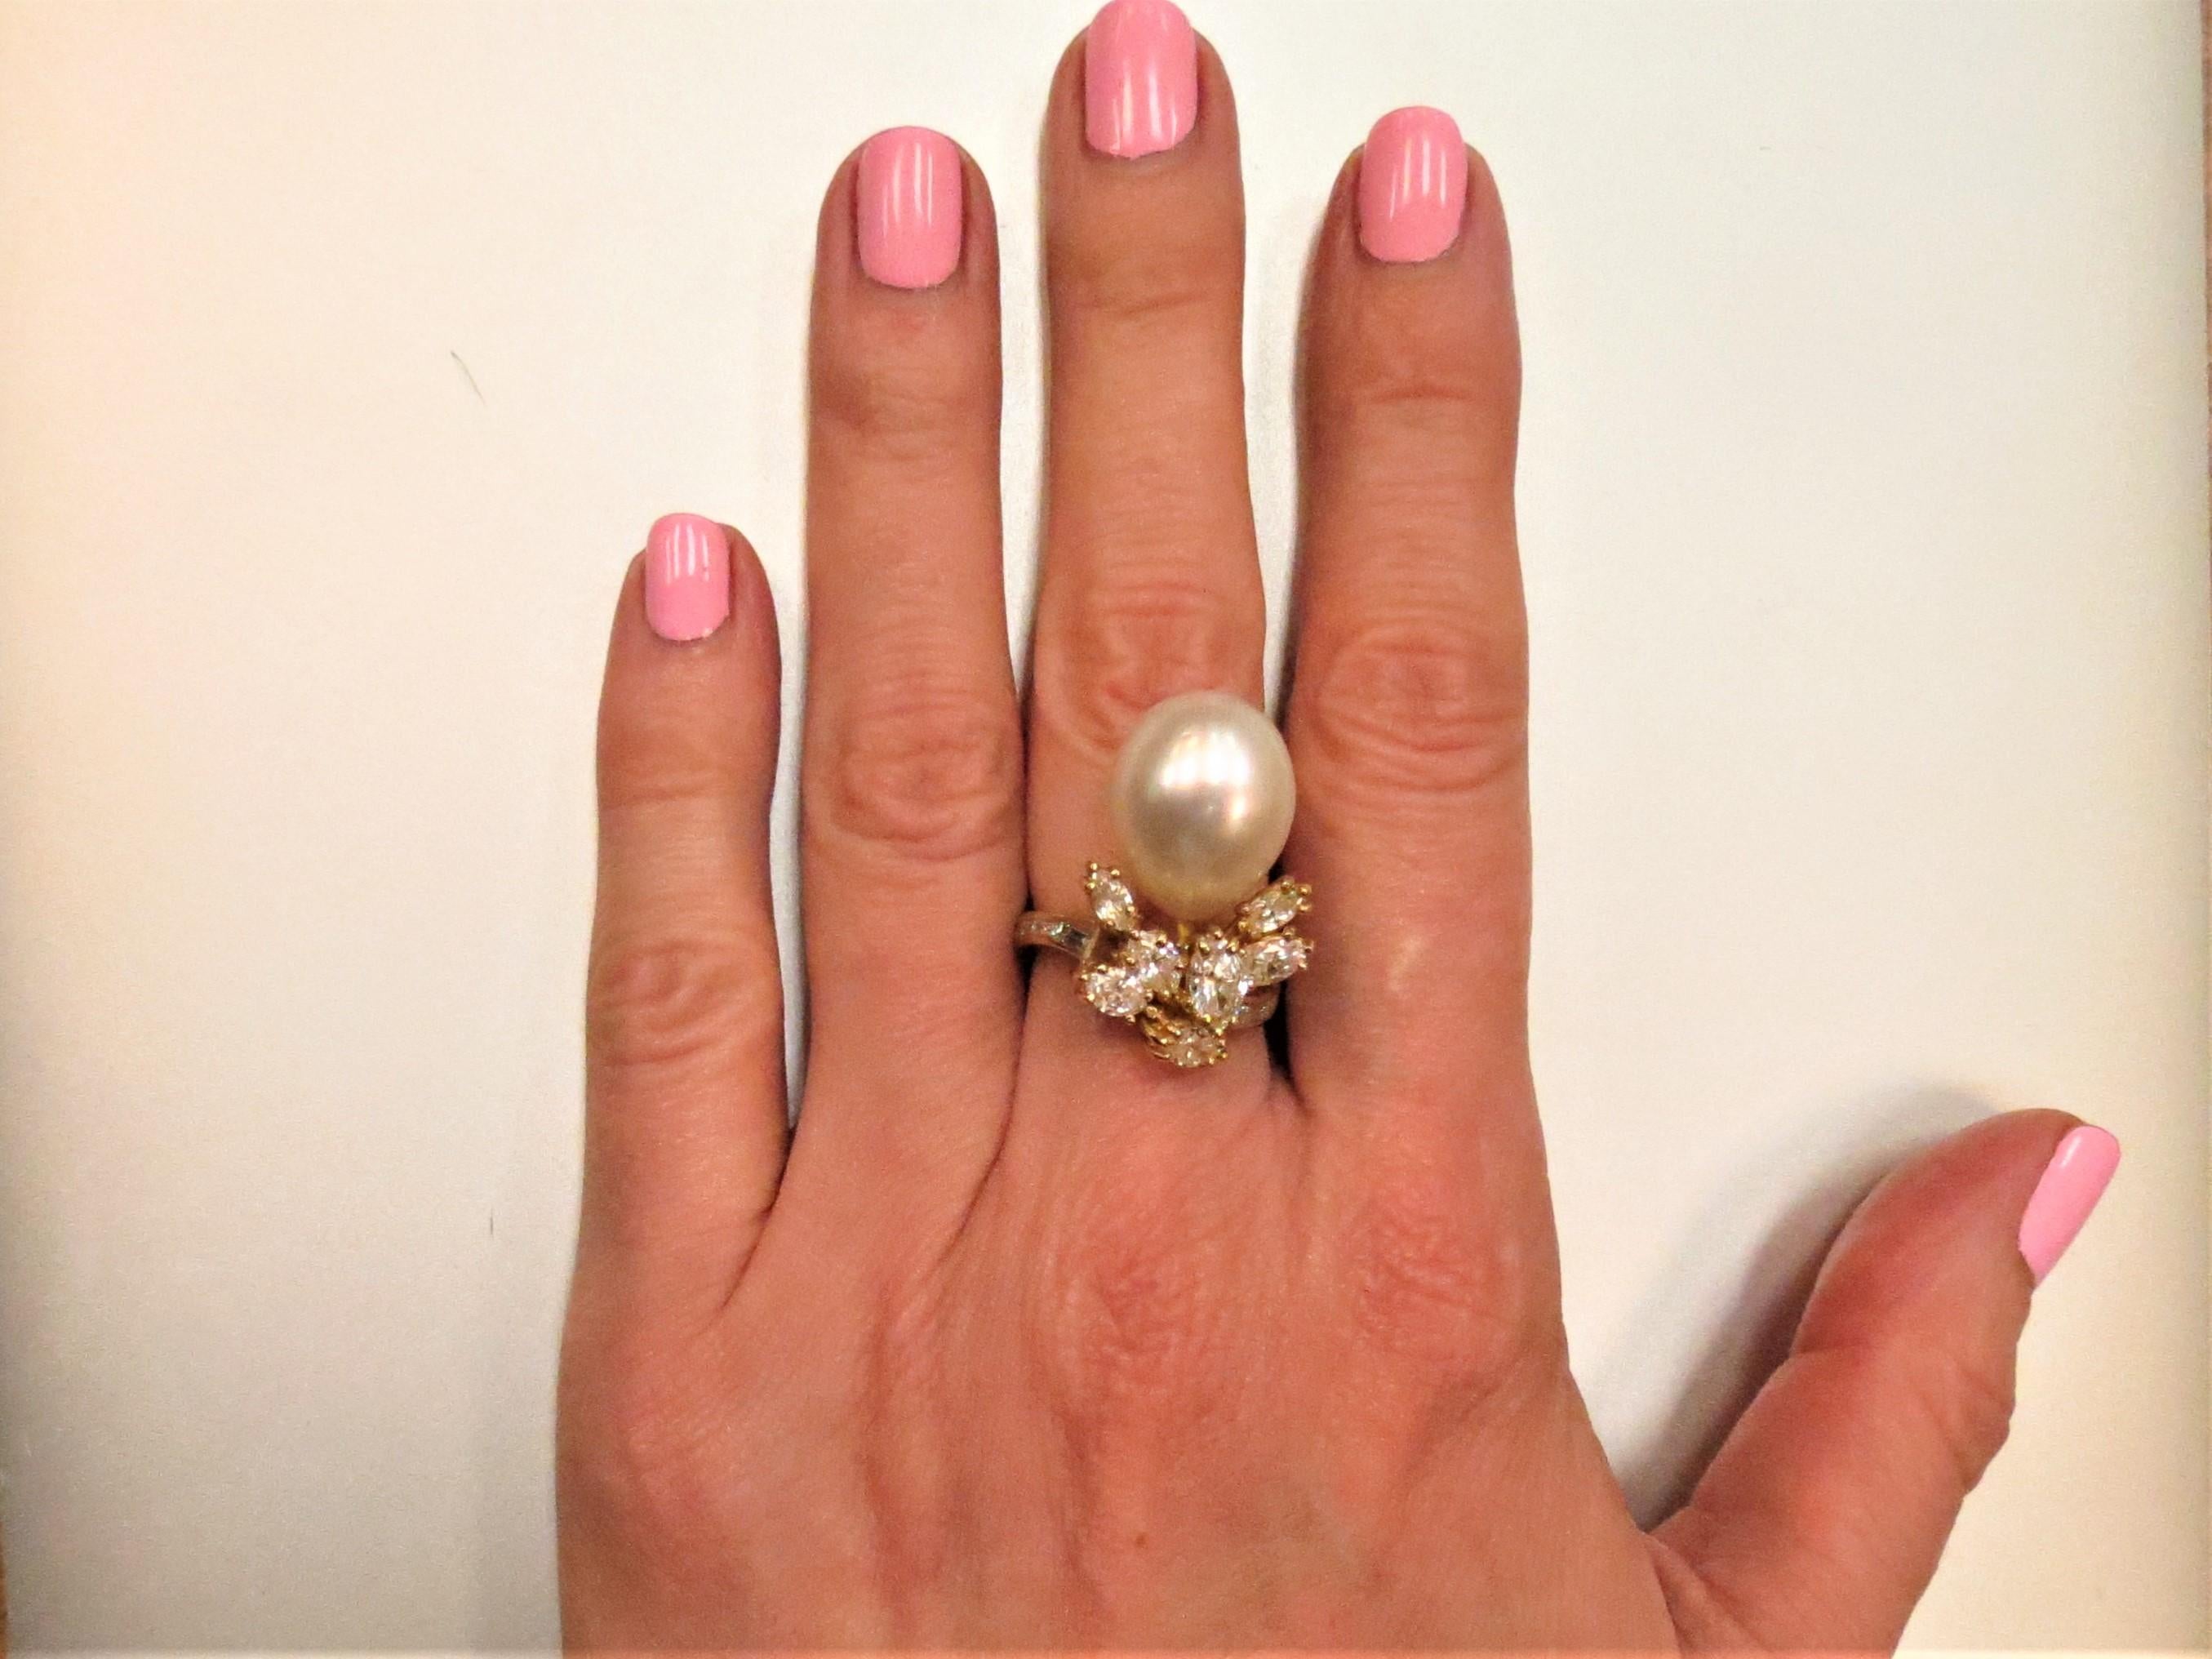 18K yellow gold, South Sea Pearl and diamond ring, prong set with seven marquise diamonds weighing 1.71cts, G-H color, VS clarity, and channel set with eight baguette diamonds weighing .30cts, G-H color, VS clarity and one pear shape South Sea Pearl